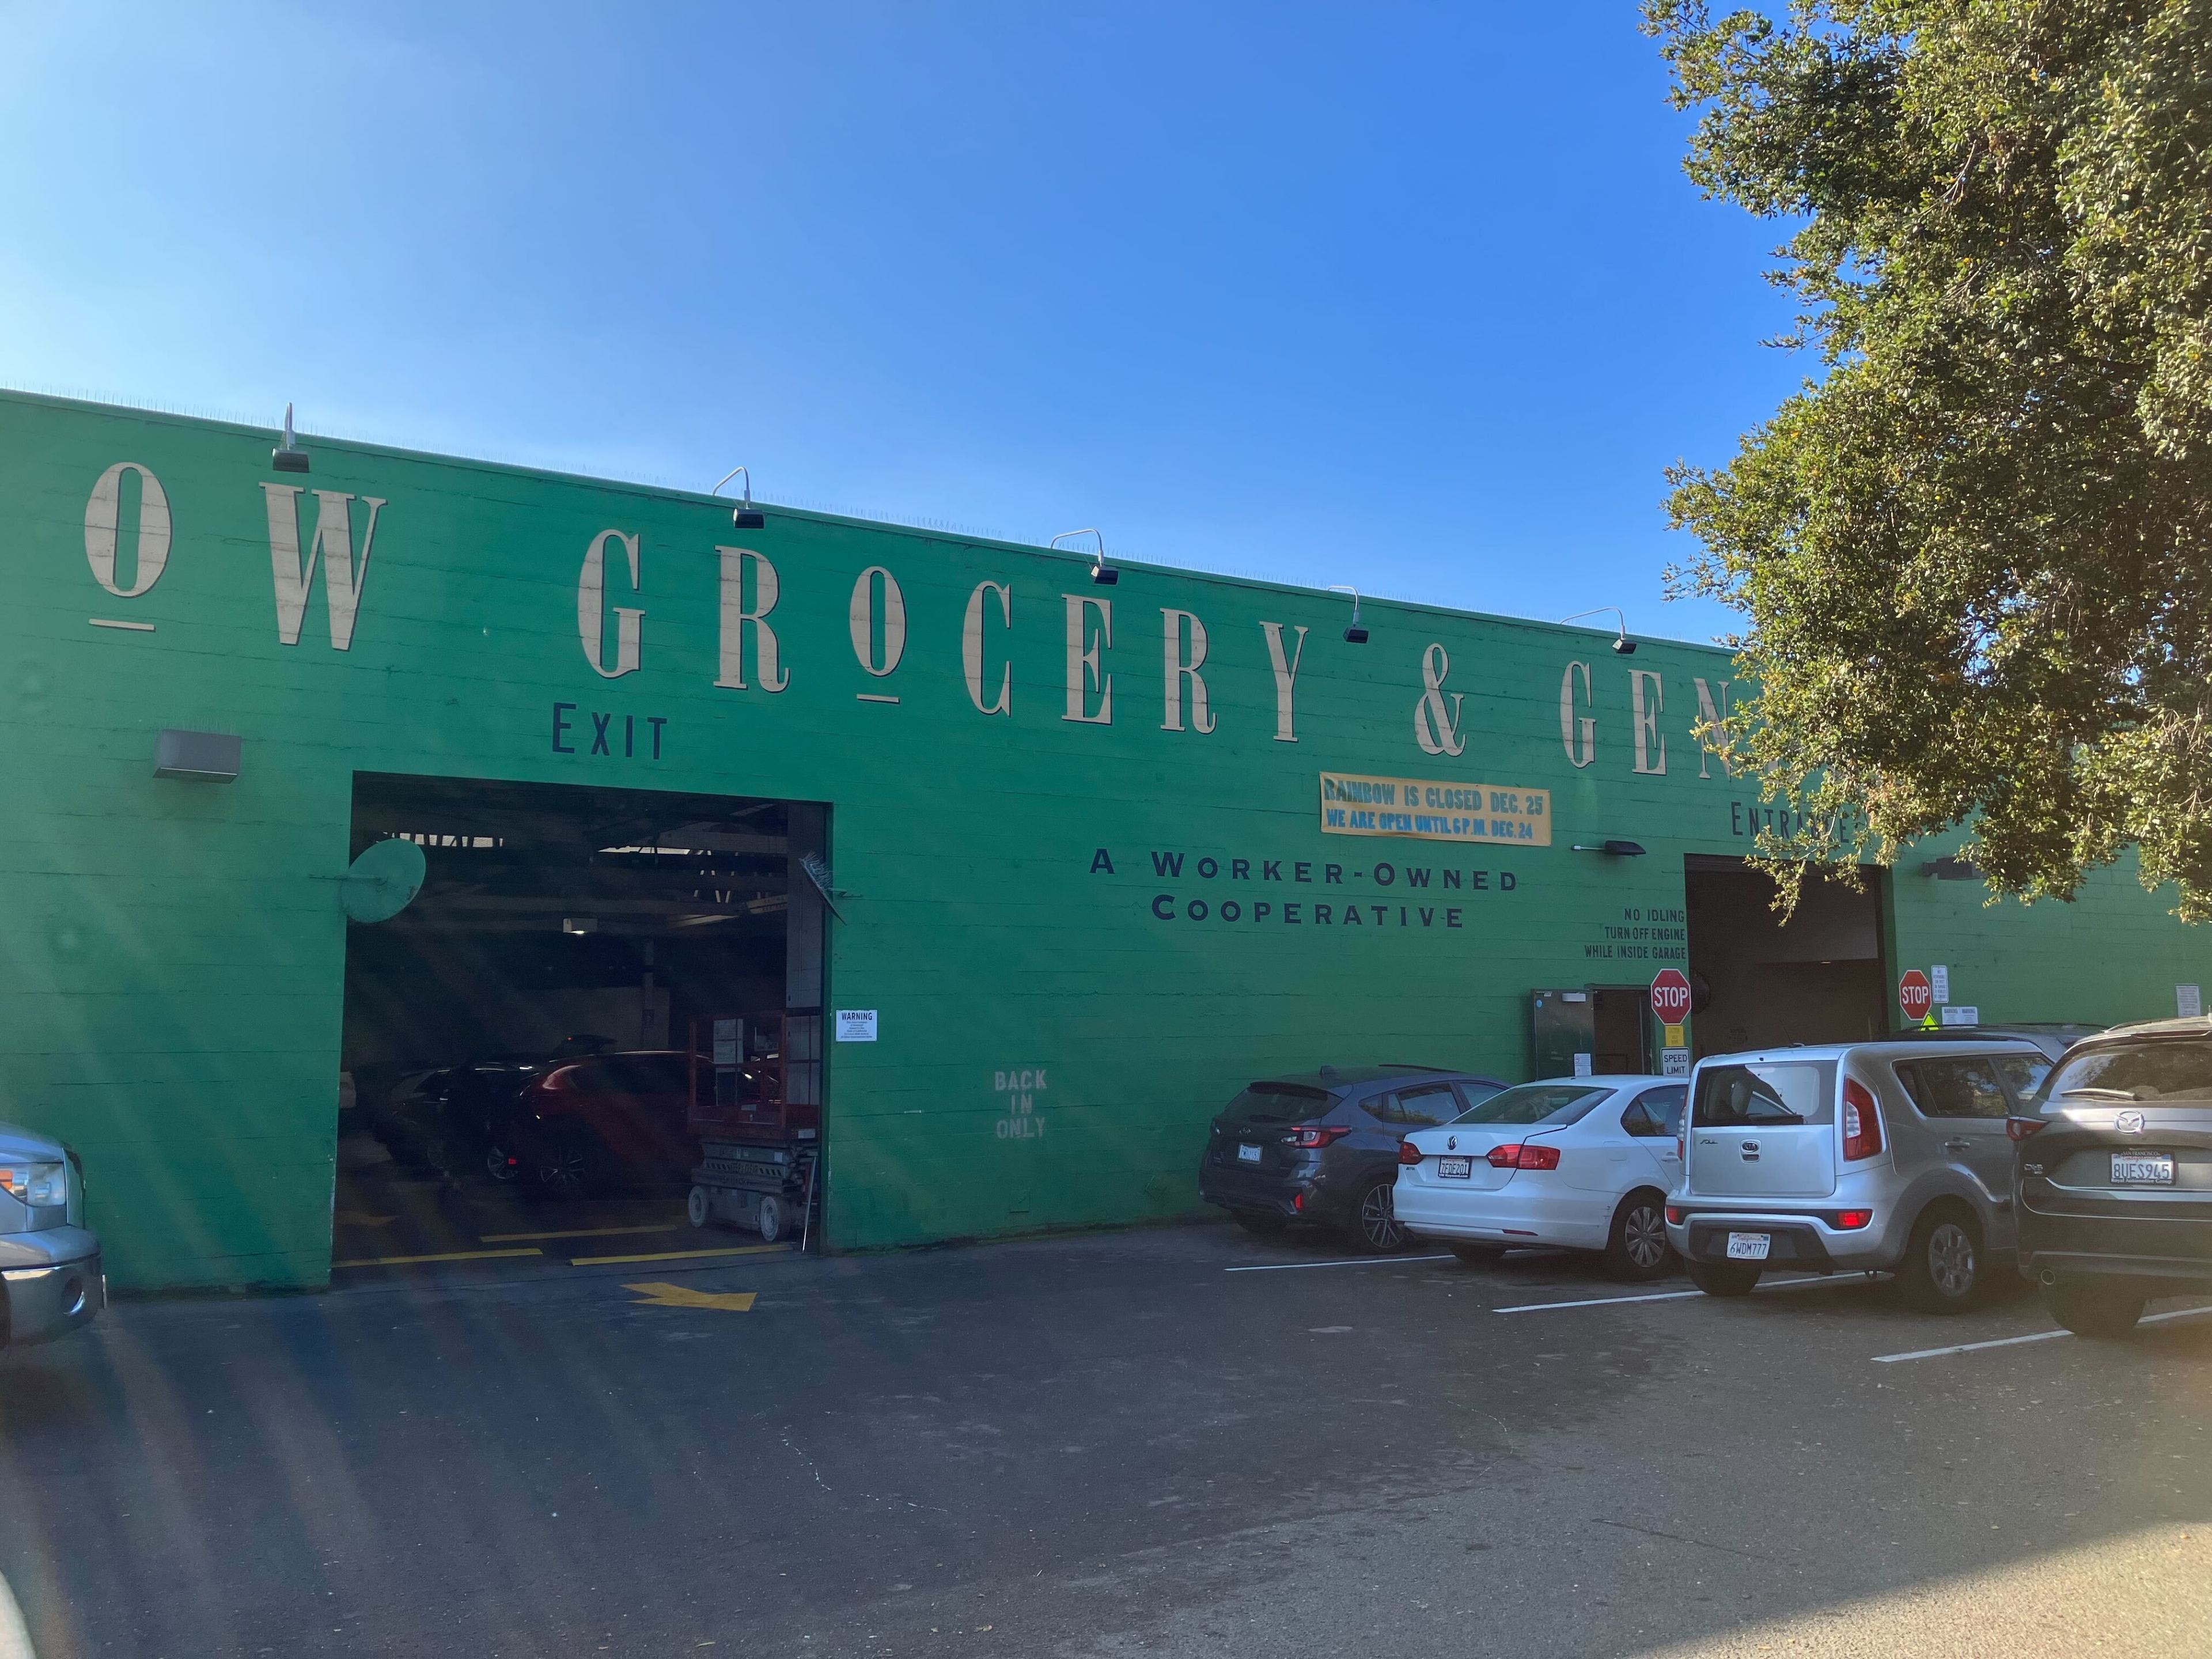 a warehouse is seen painted green with the word grocery above the entrance by parked cars